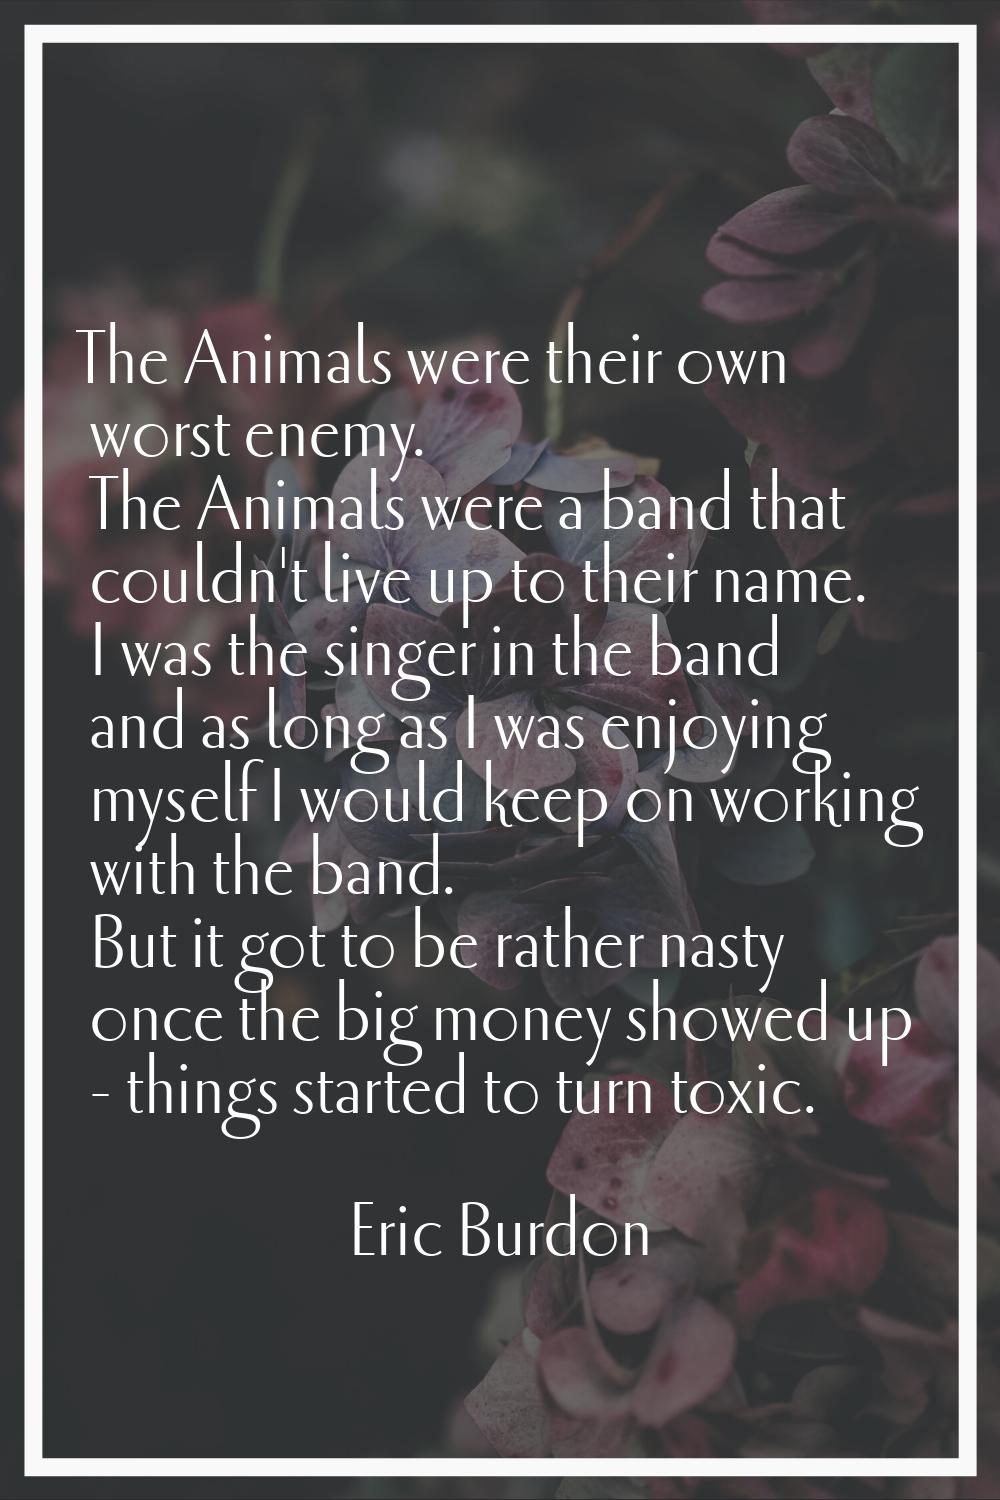 The Animals were their own worst enemy. The Animals were a band that couldn't live up to their name